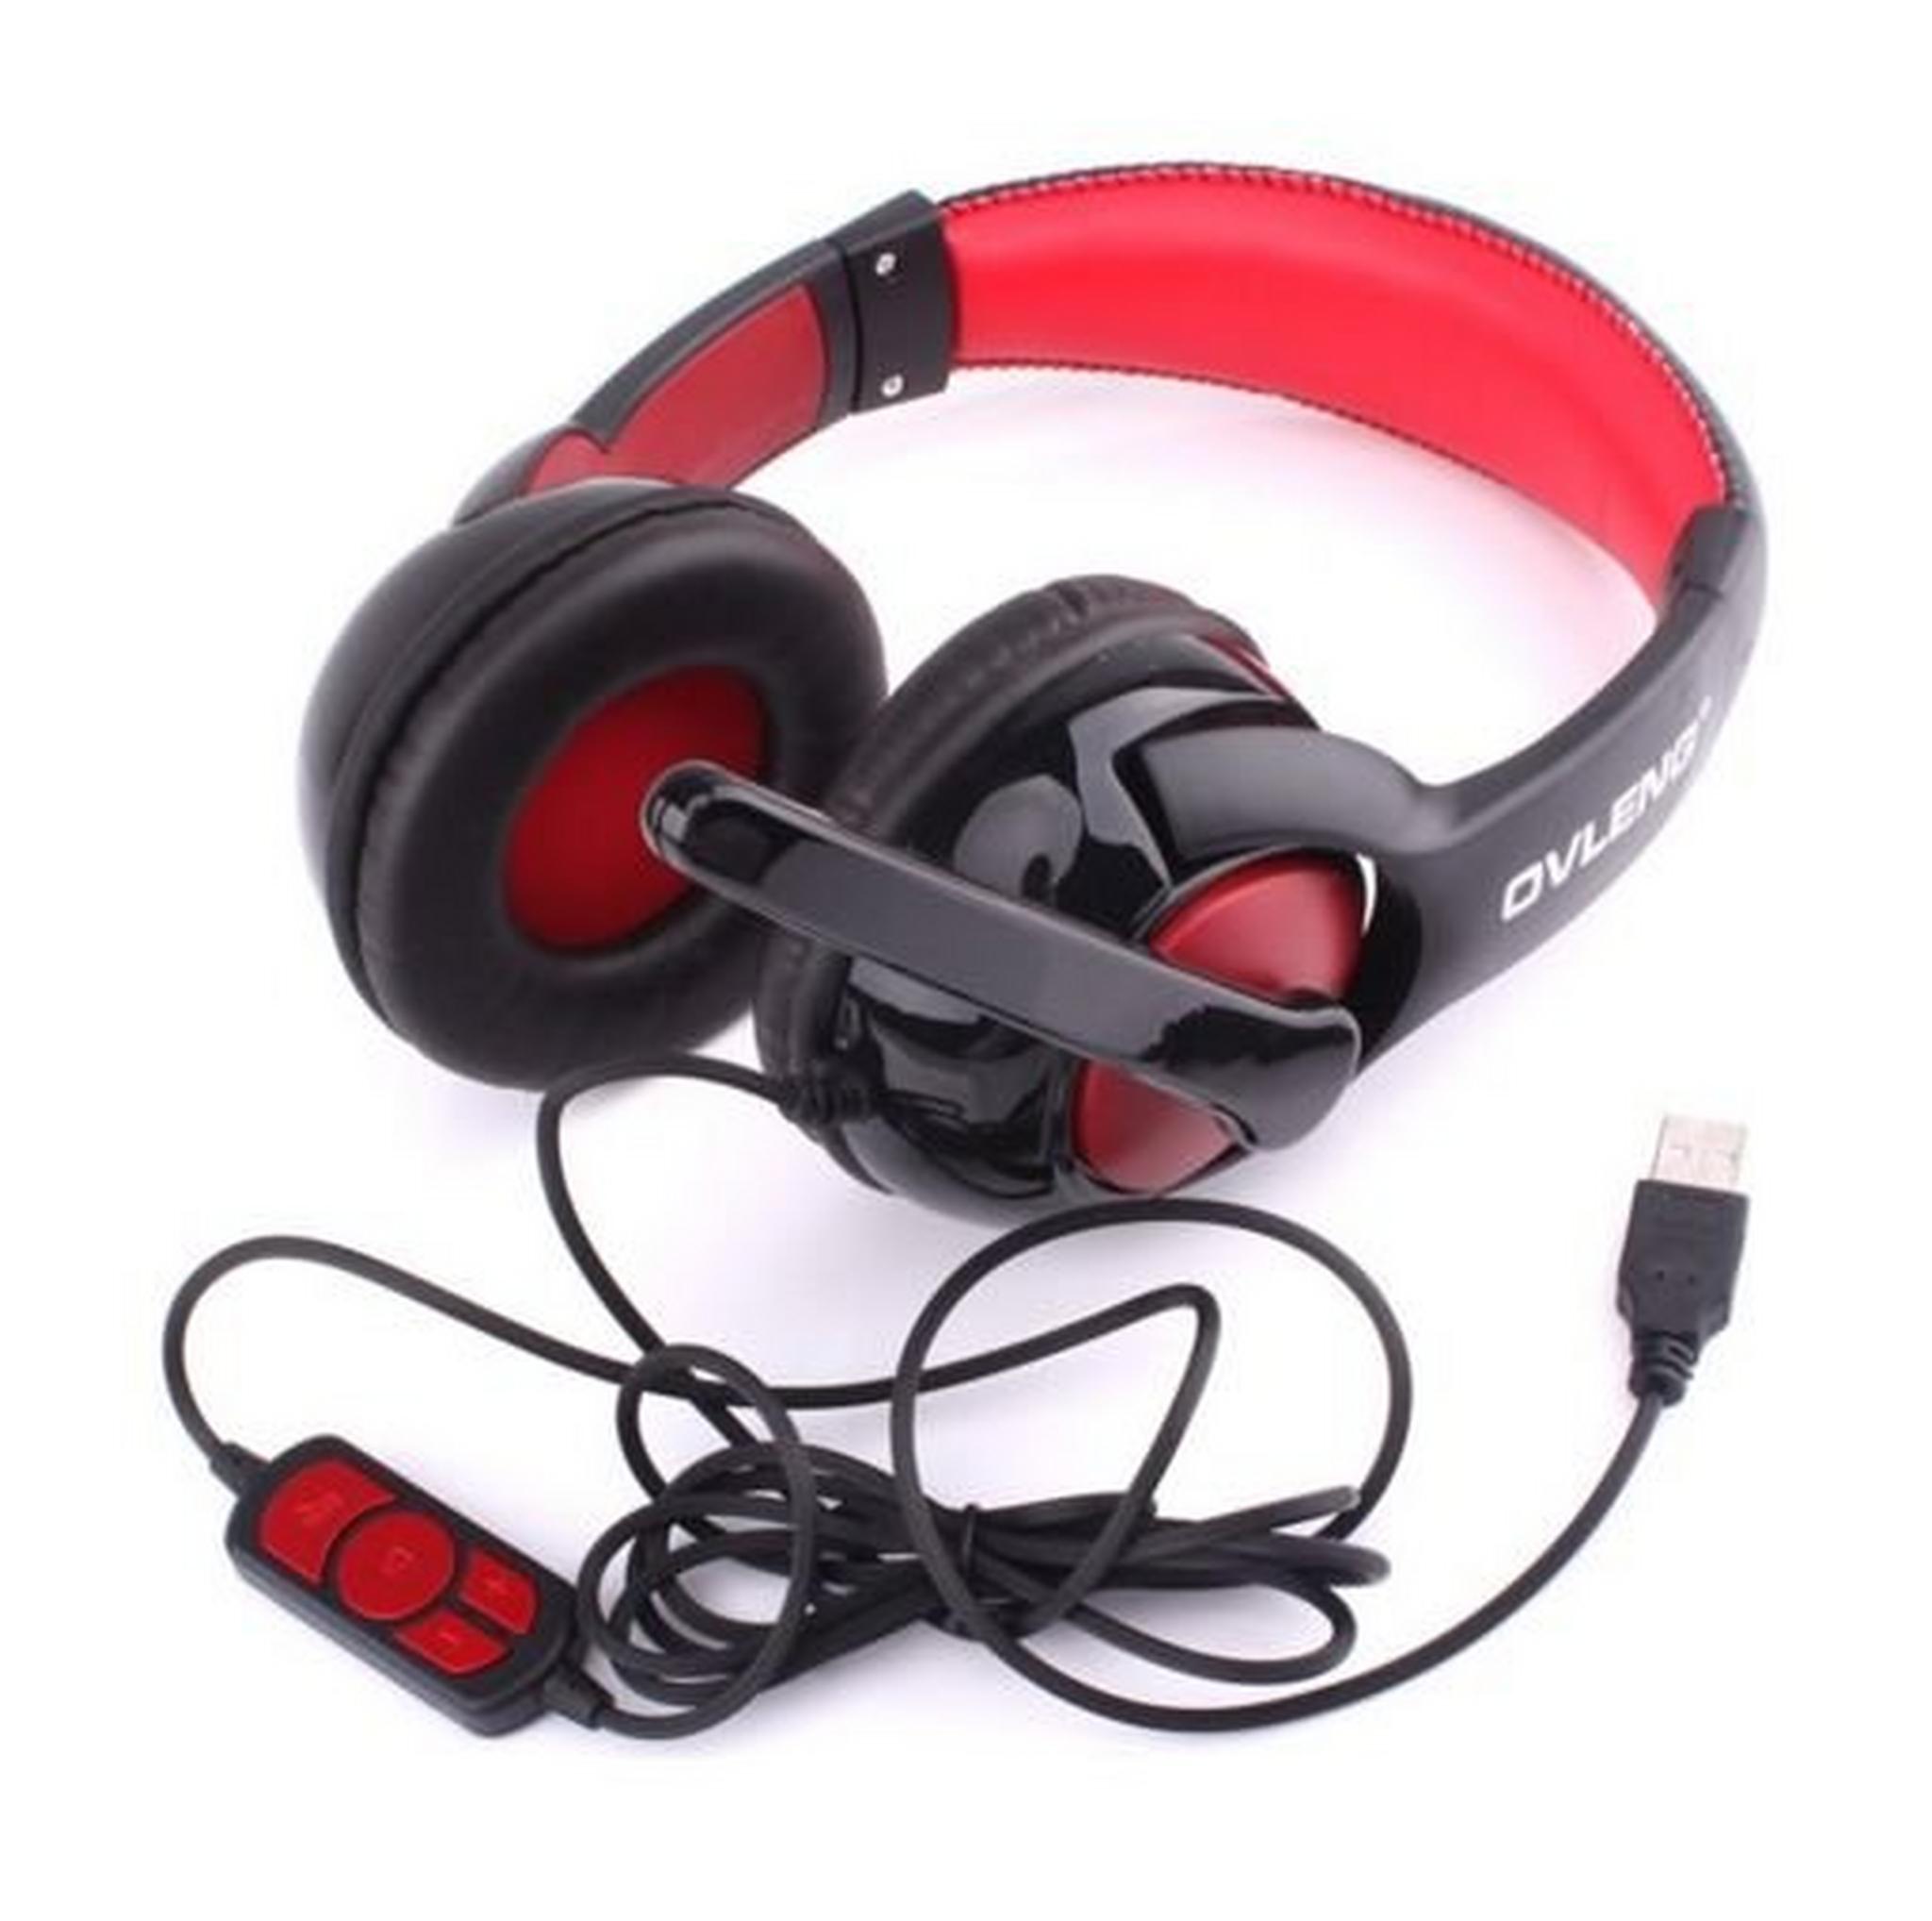 Ovleng Q10 USB Wired On-Ear Headset With Mic - Black